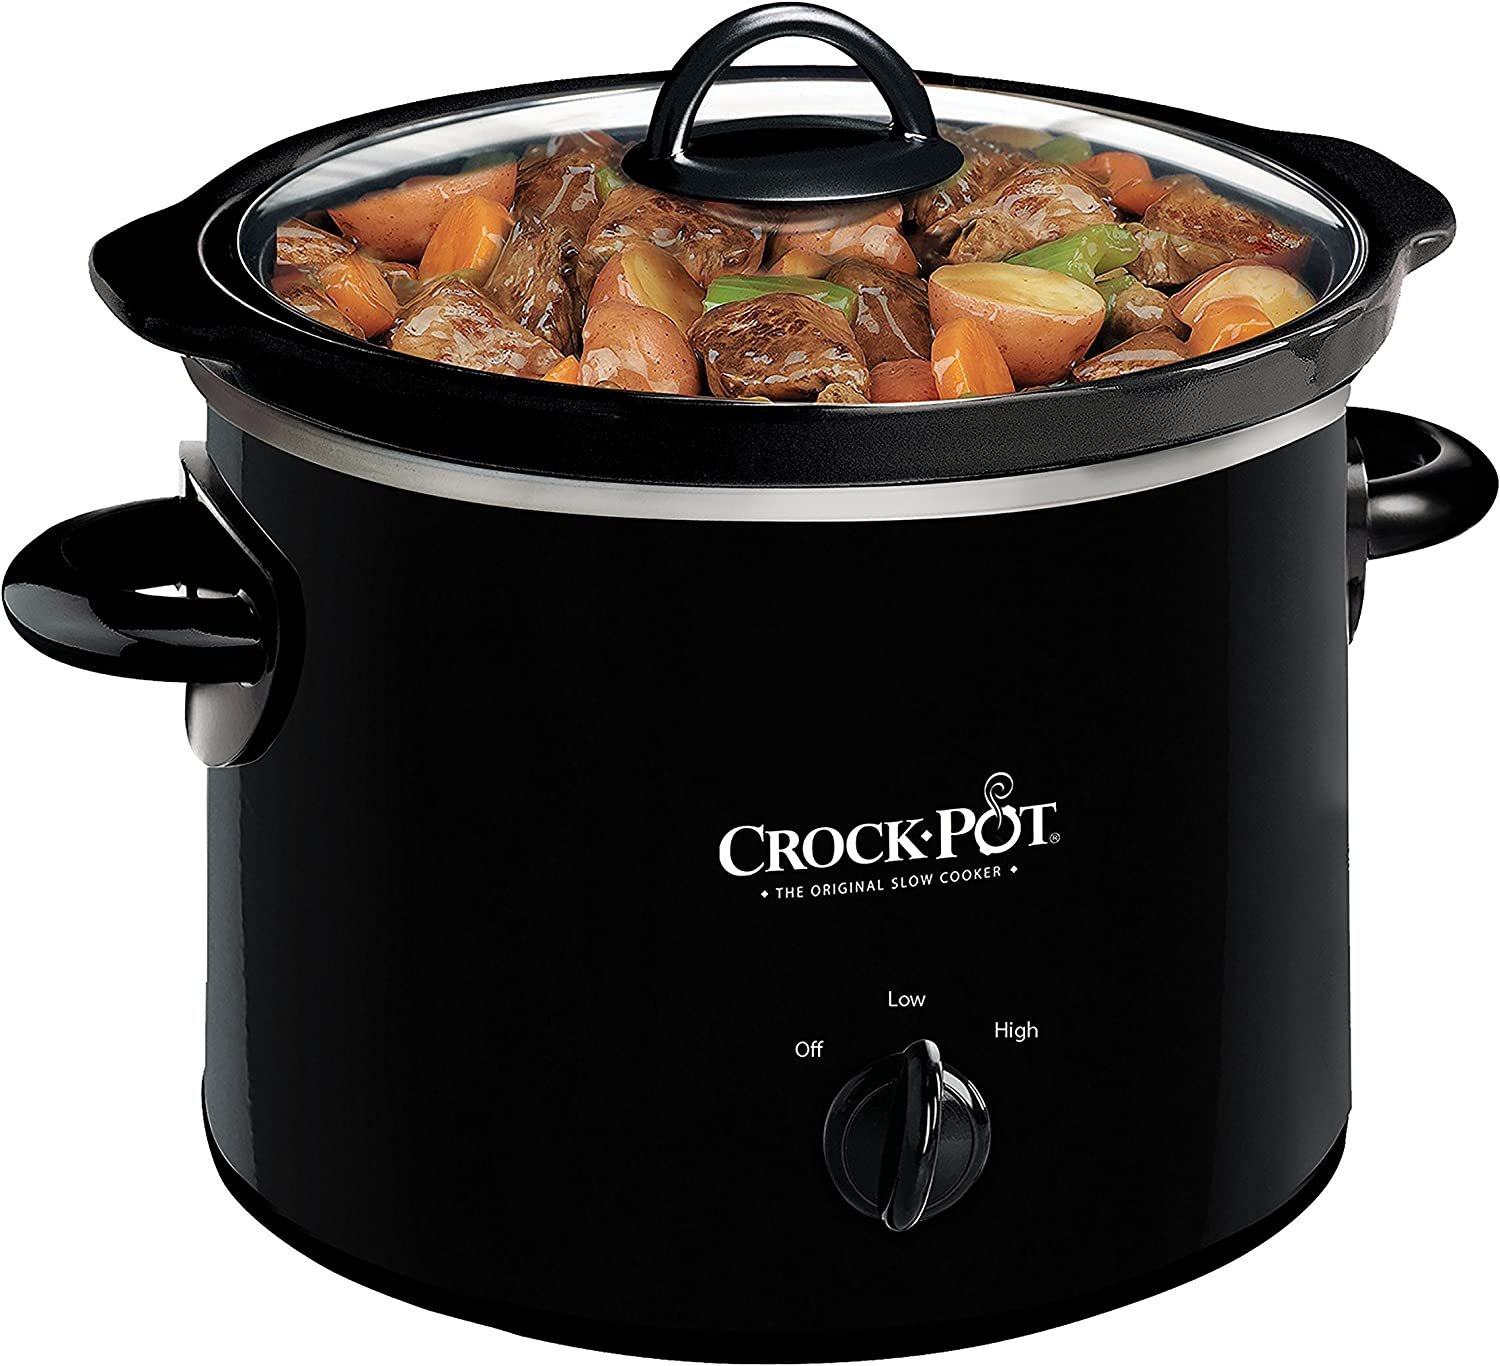 Do Small Crock-Pots Cook Faster? - Infarrantly Creative